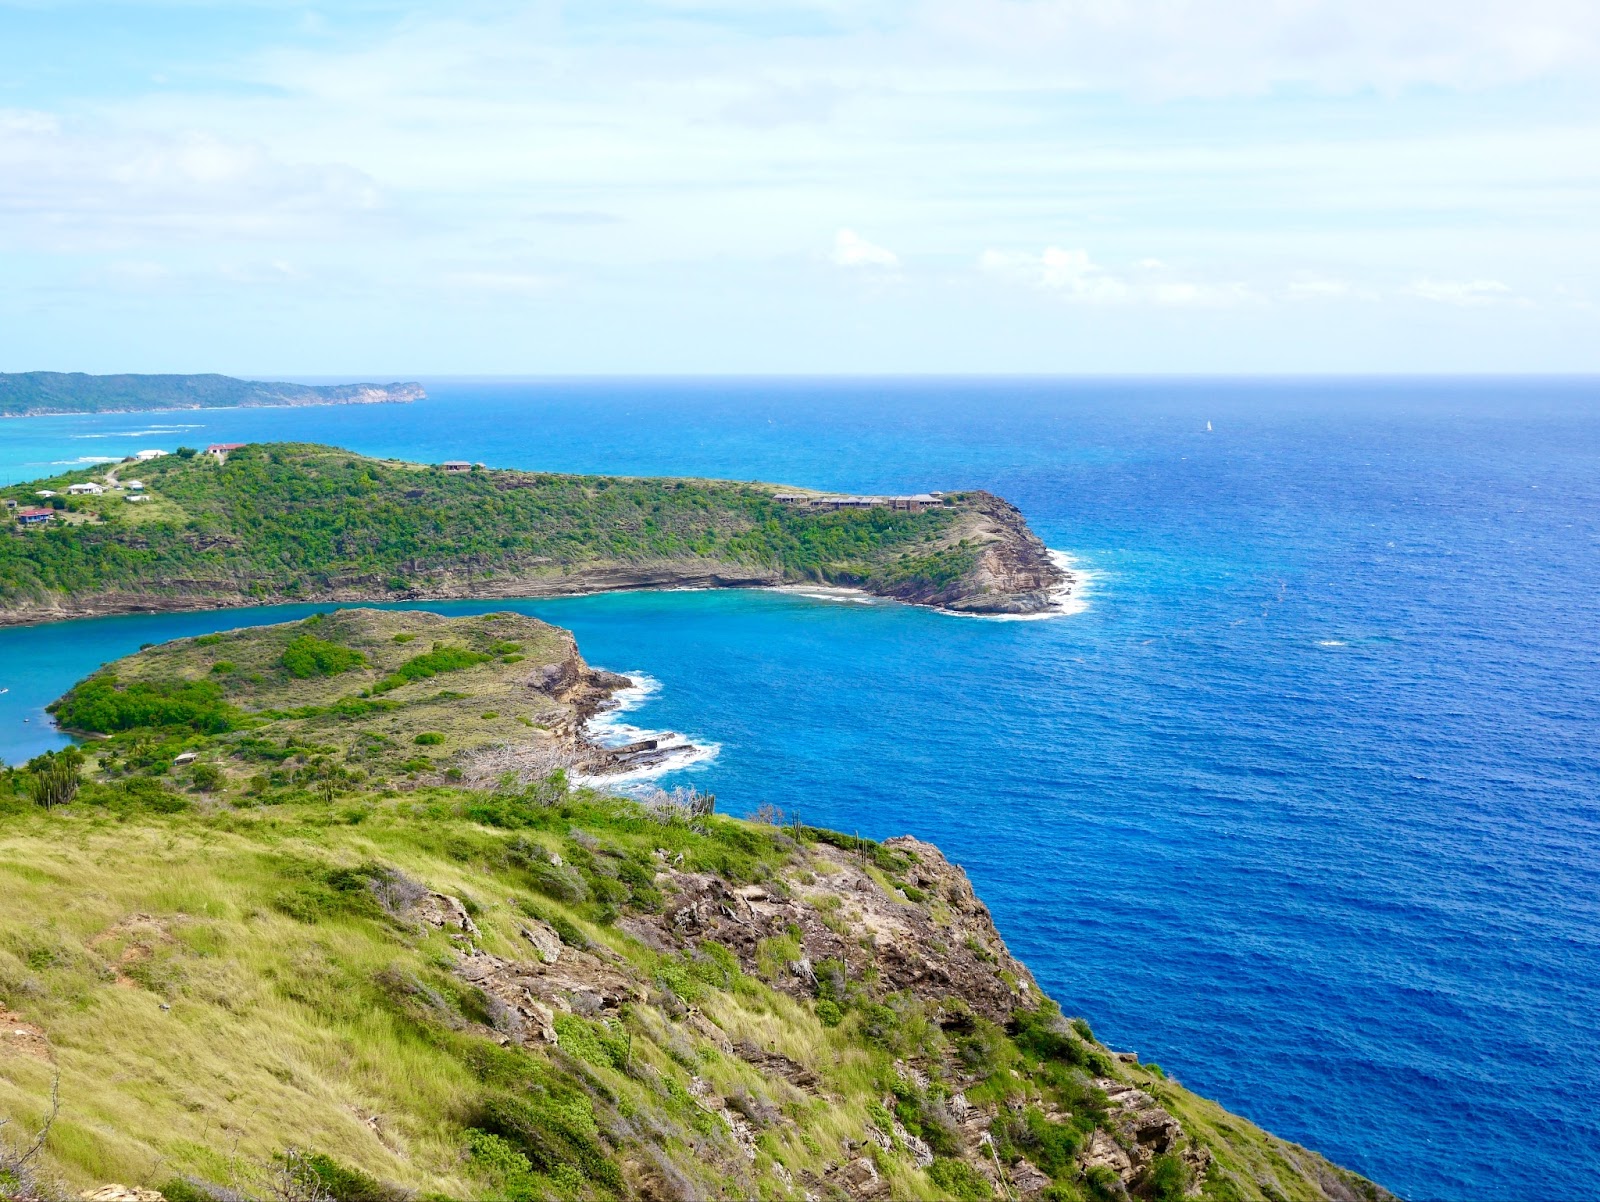 A stunning view of Shirley Heights during the Round Island Tour in Antigua.